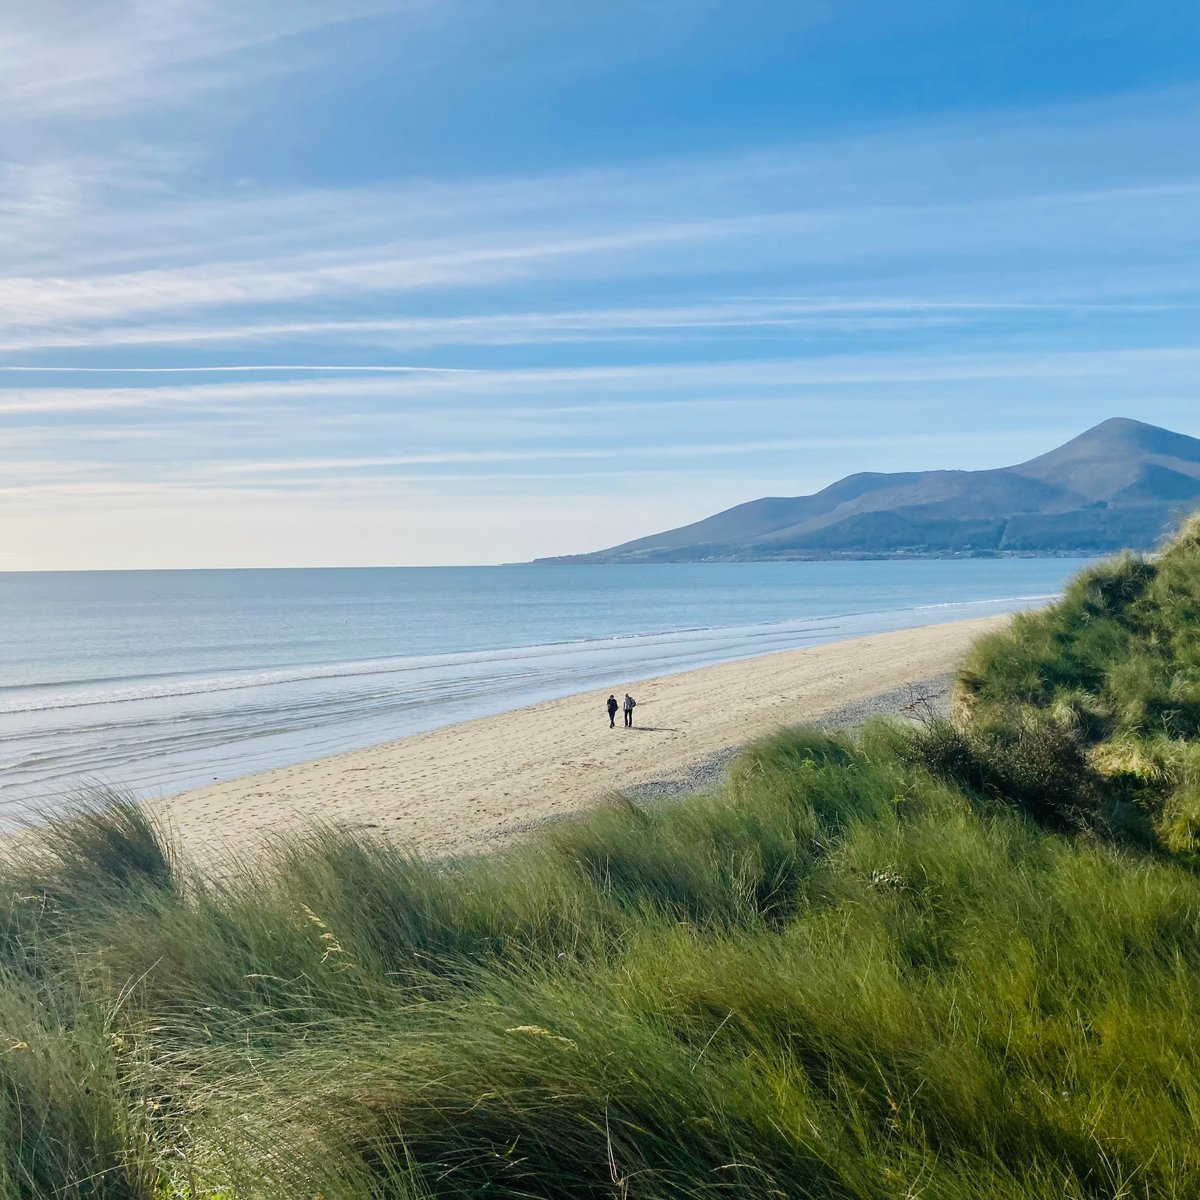 Magnificent walk in the October sunshine this morning.  All set for the week ahead! @NationalTrustNI #AGoodWalk #CoDown #MourneMountains #Murlough